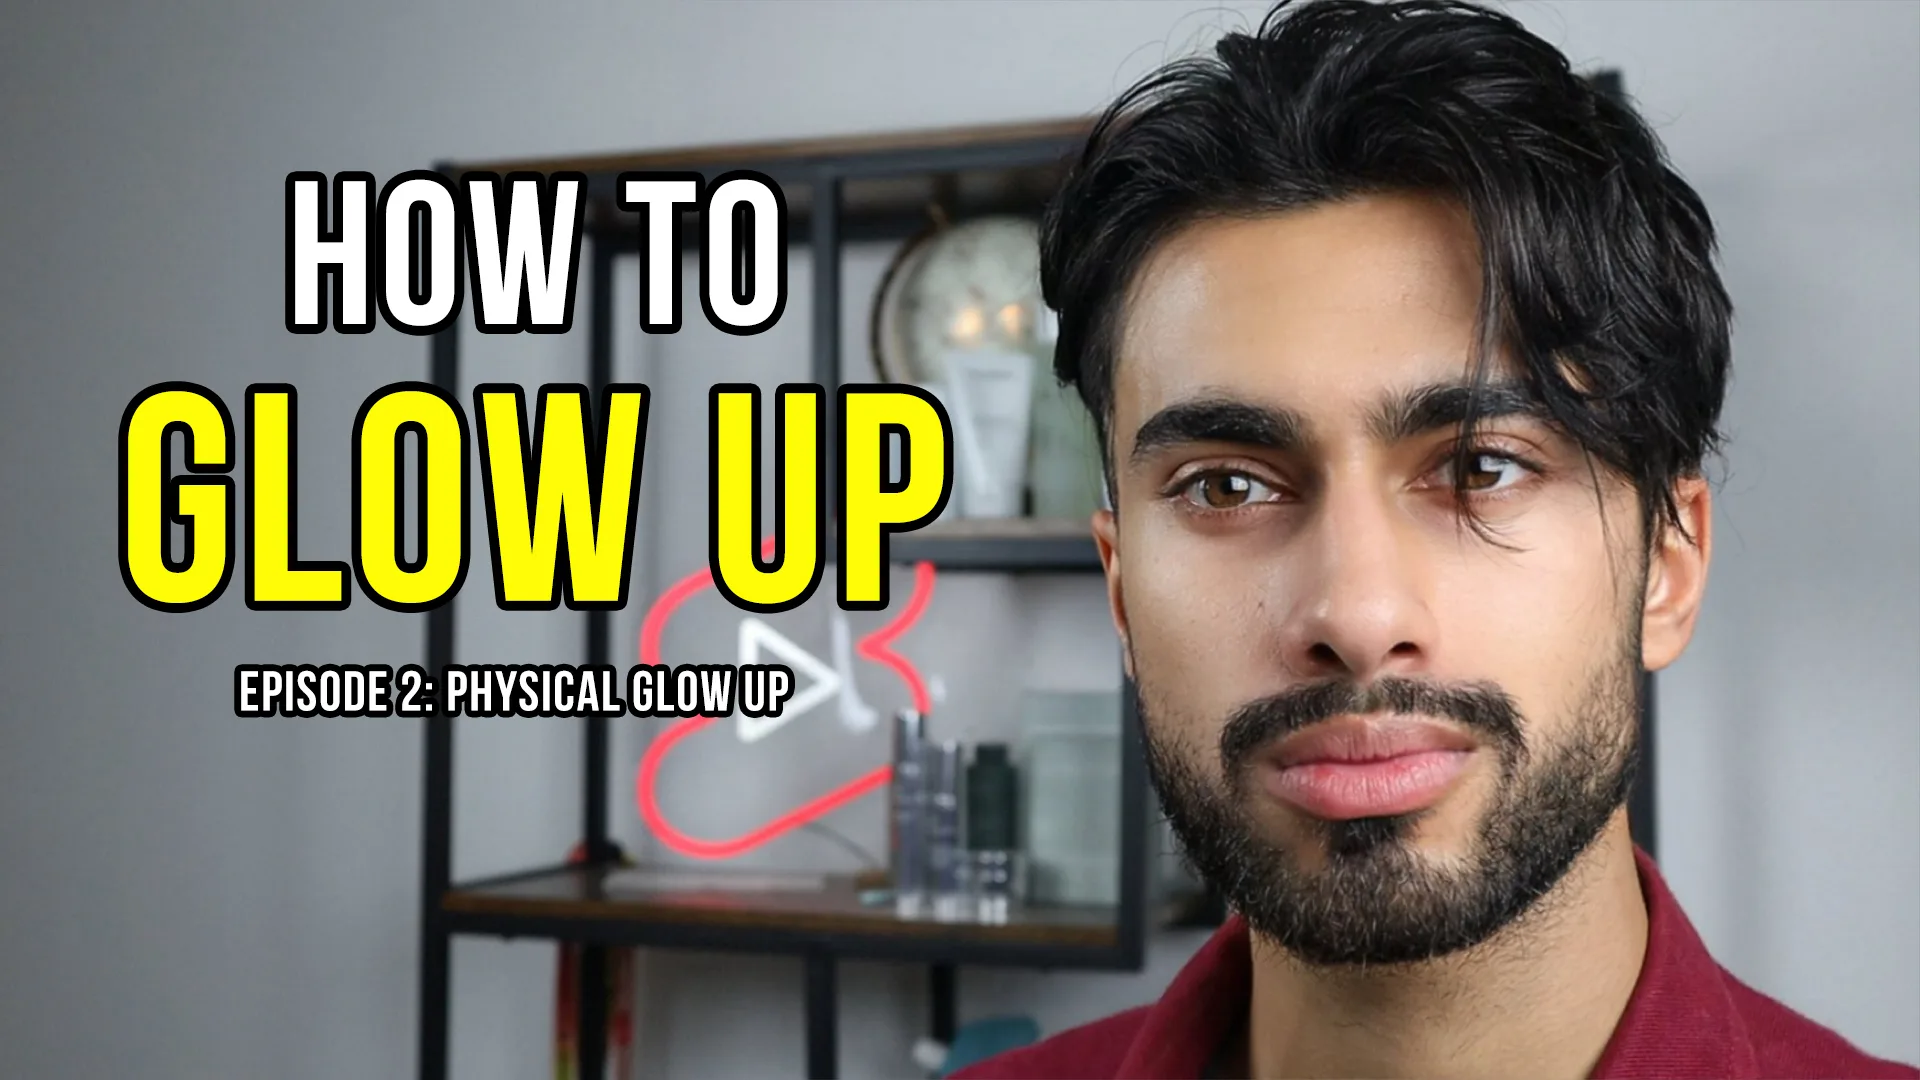 How To Glow Up Episode 2: Physical Glow Up